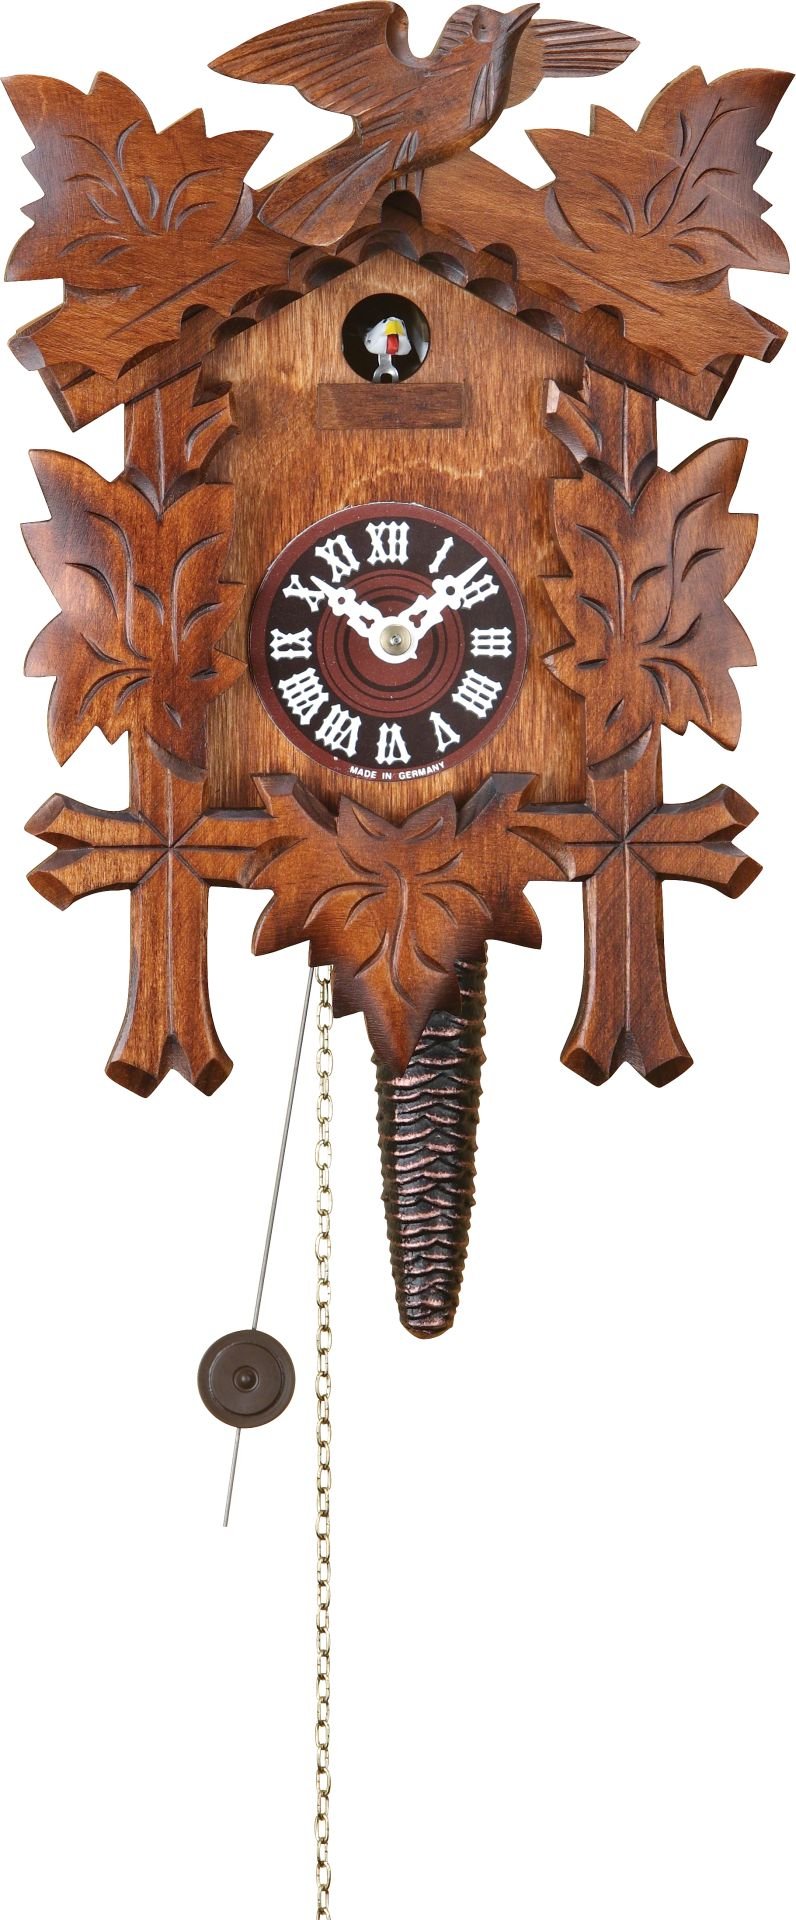 Cuckoo Clock Carved Style chain pull movement 24cm by Trenkle Uhren